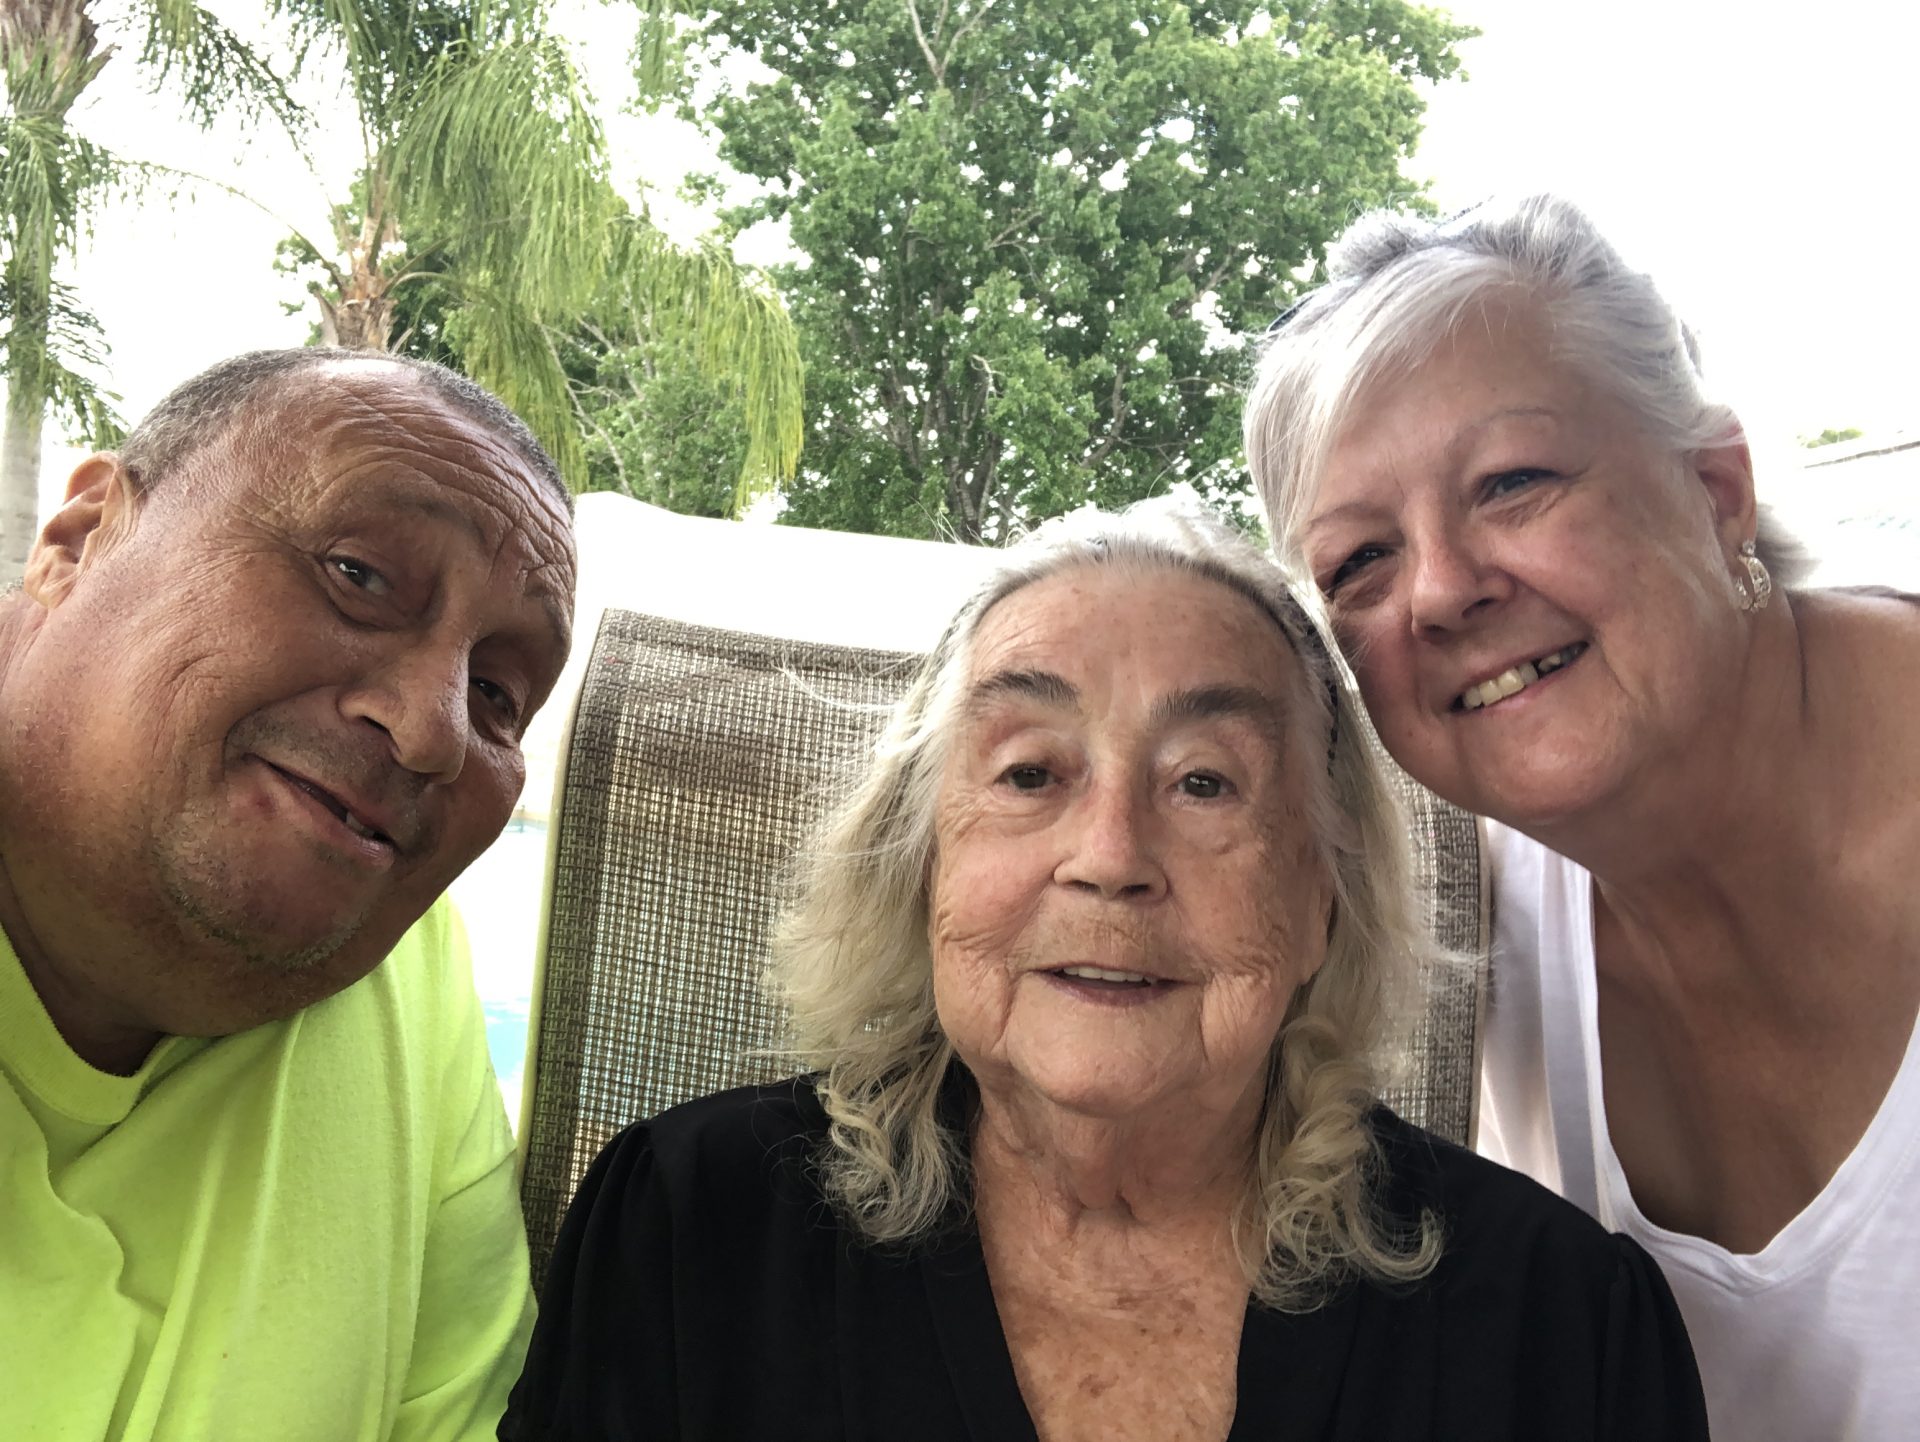 The three musketeers. Mom was so fortunate thank you decided to be with us at the end. It may have been only for a short time but it was amazing